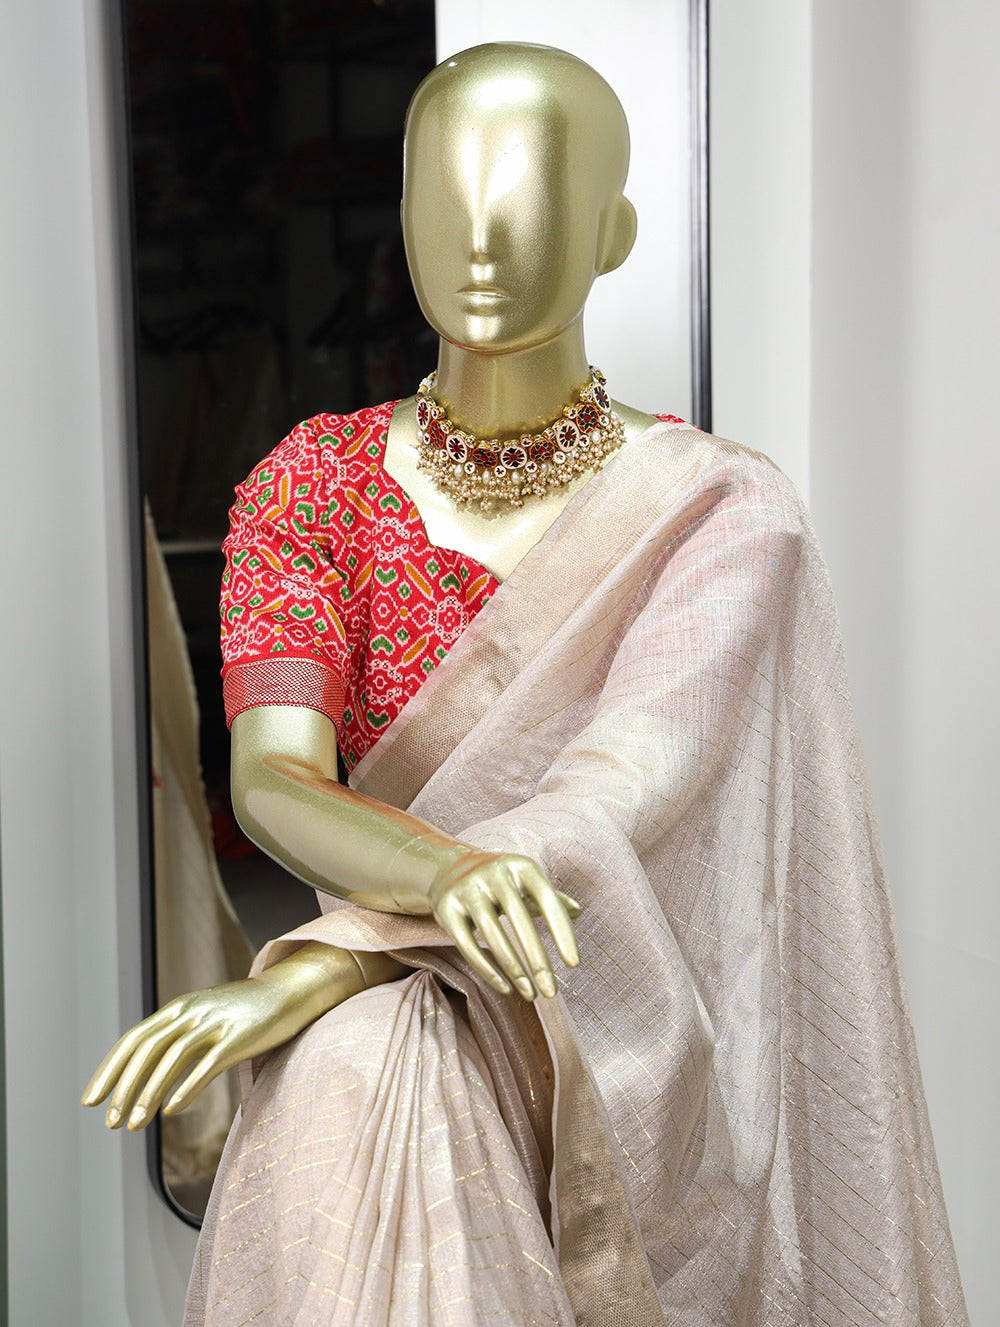 Enchanting Cream Khadi Organza Saree with Two Exquisite Blouse Options Colorful Saree